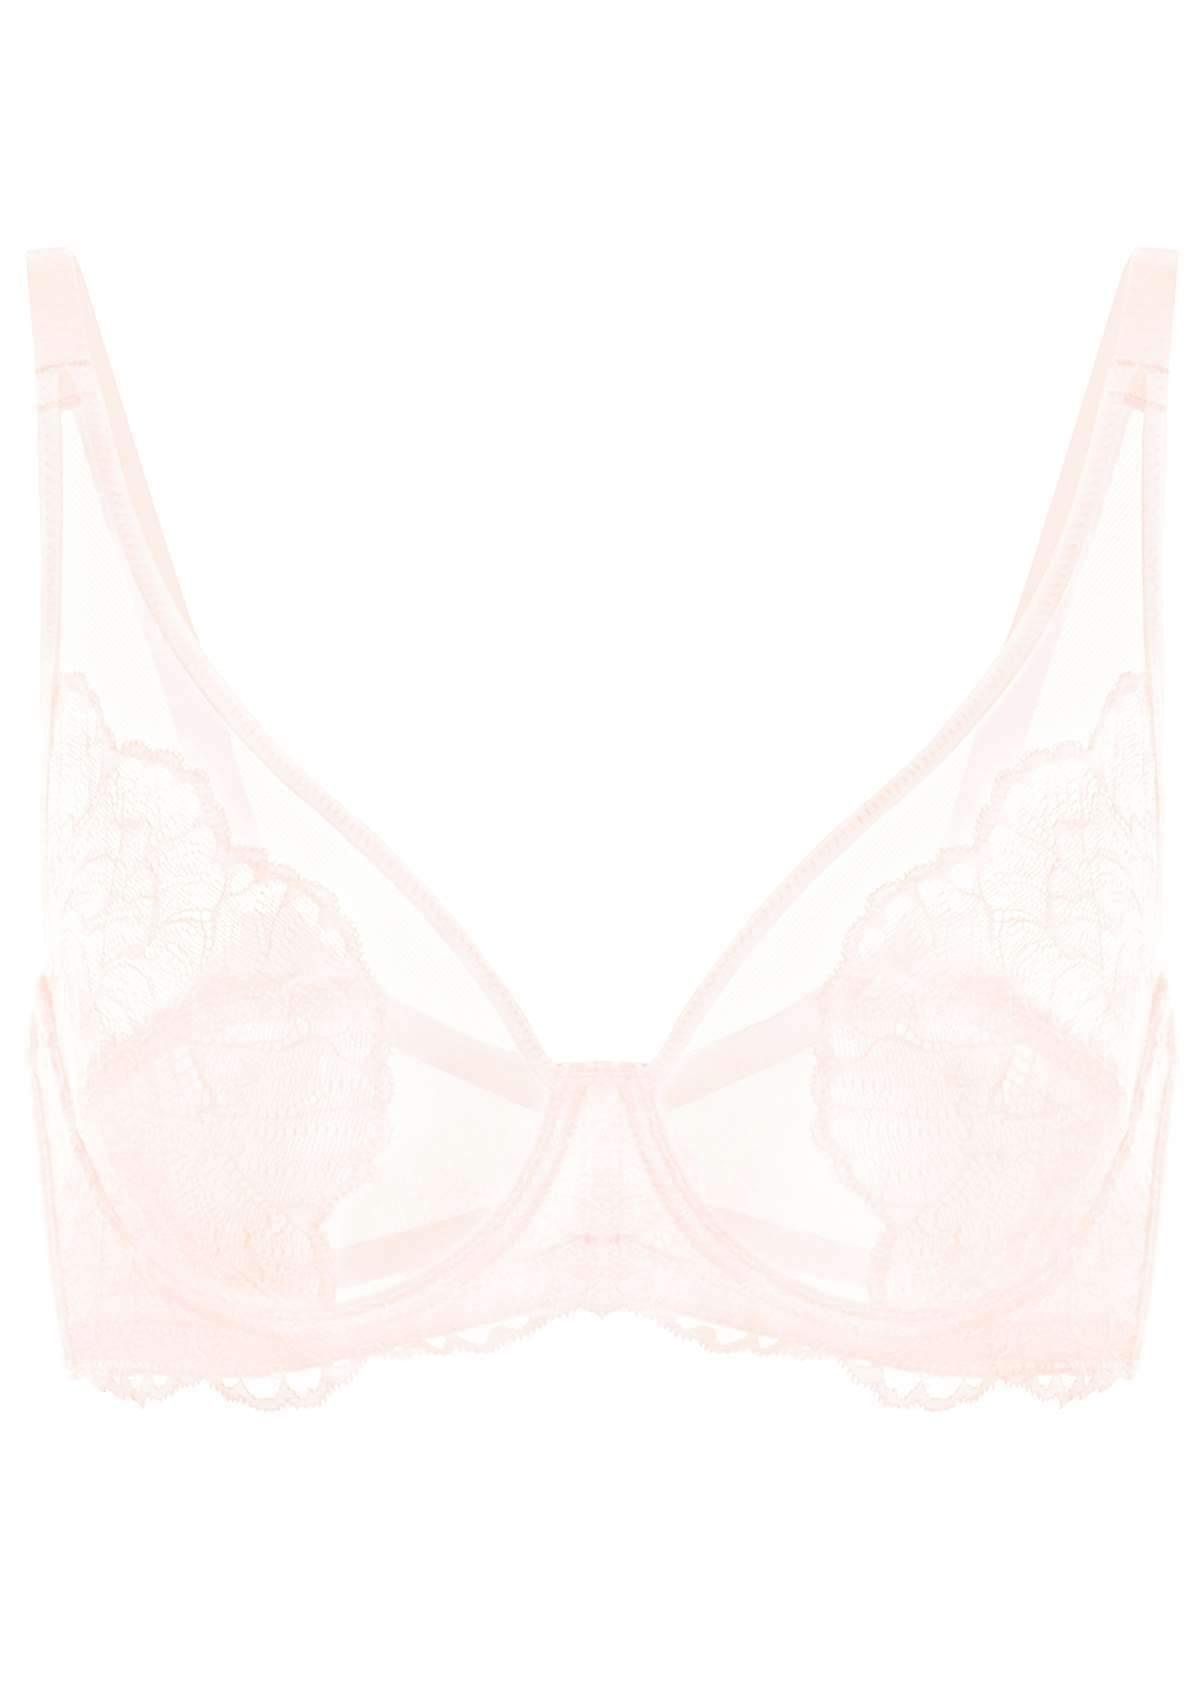 HSIA Blossom Sheer Lace Bra: Comfortable Underwire Bra For Big Busts - White / 38 / G